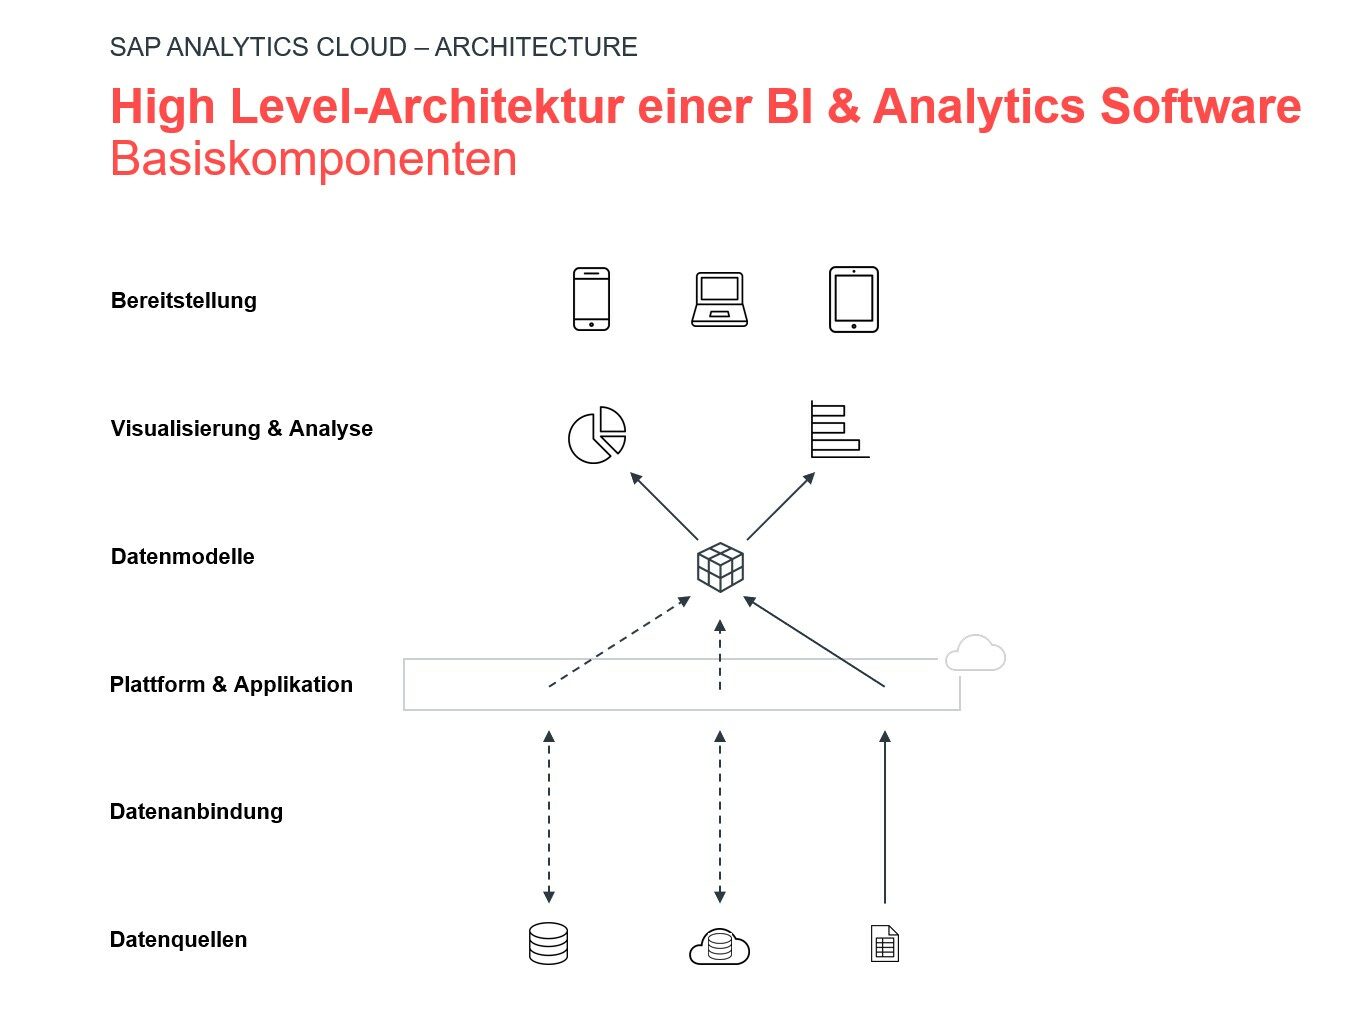 Visualization of the architecture of BI & analytics software